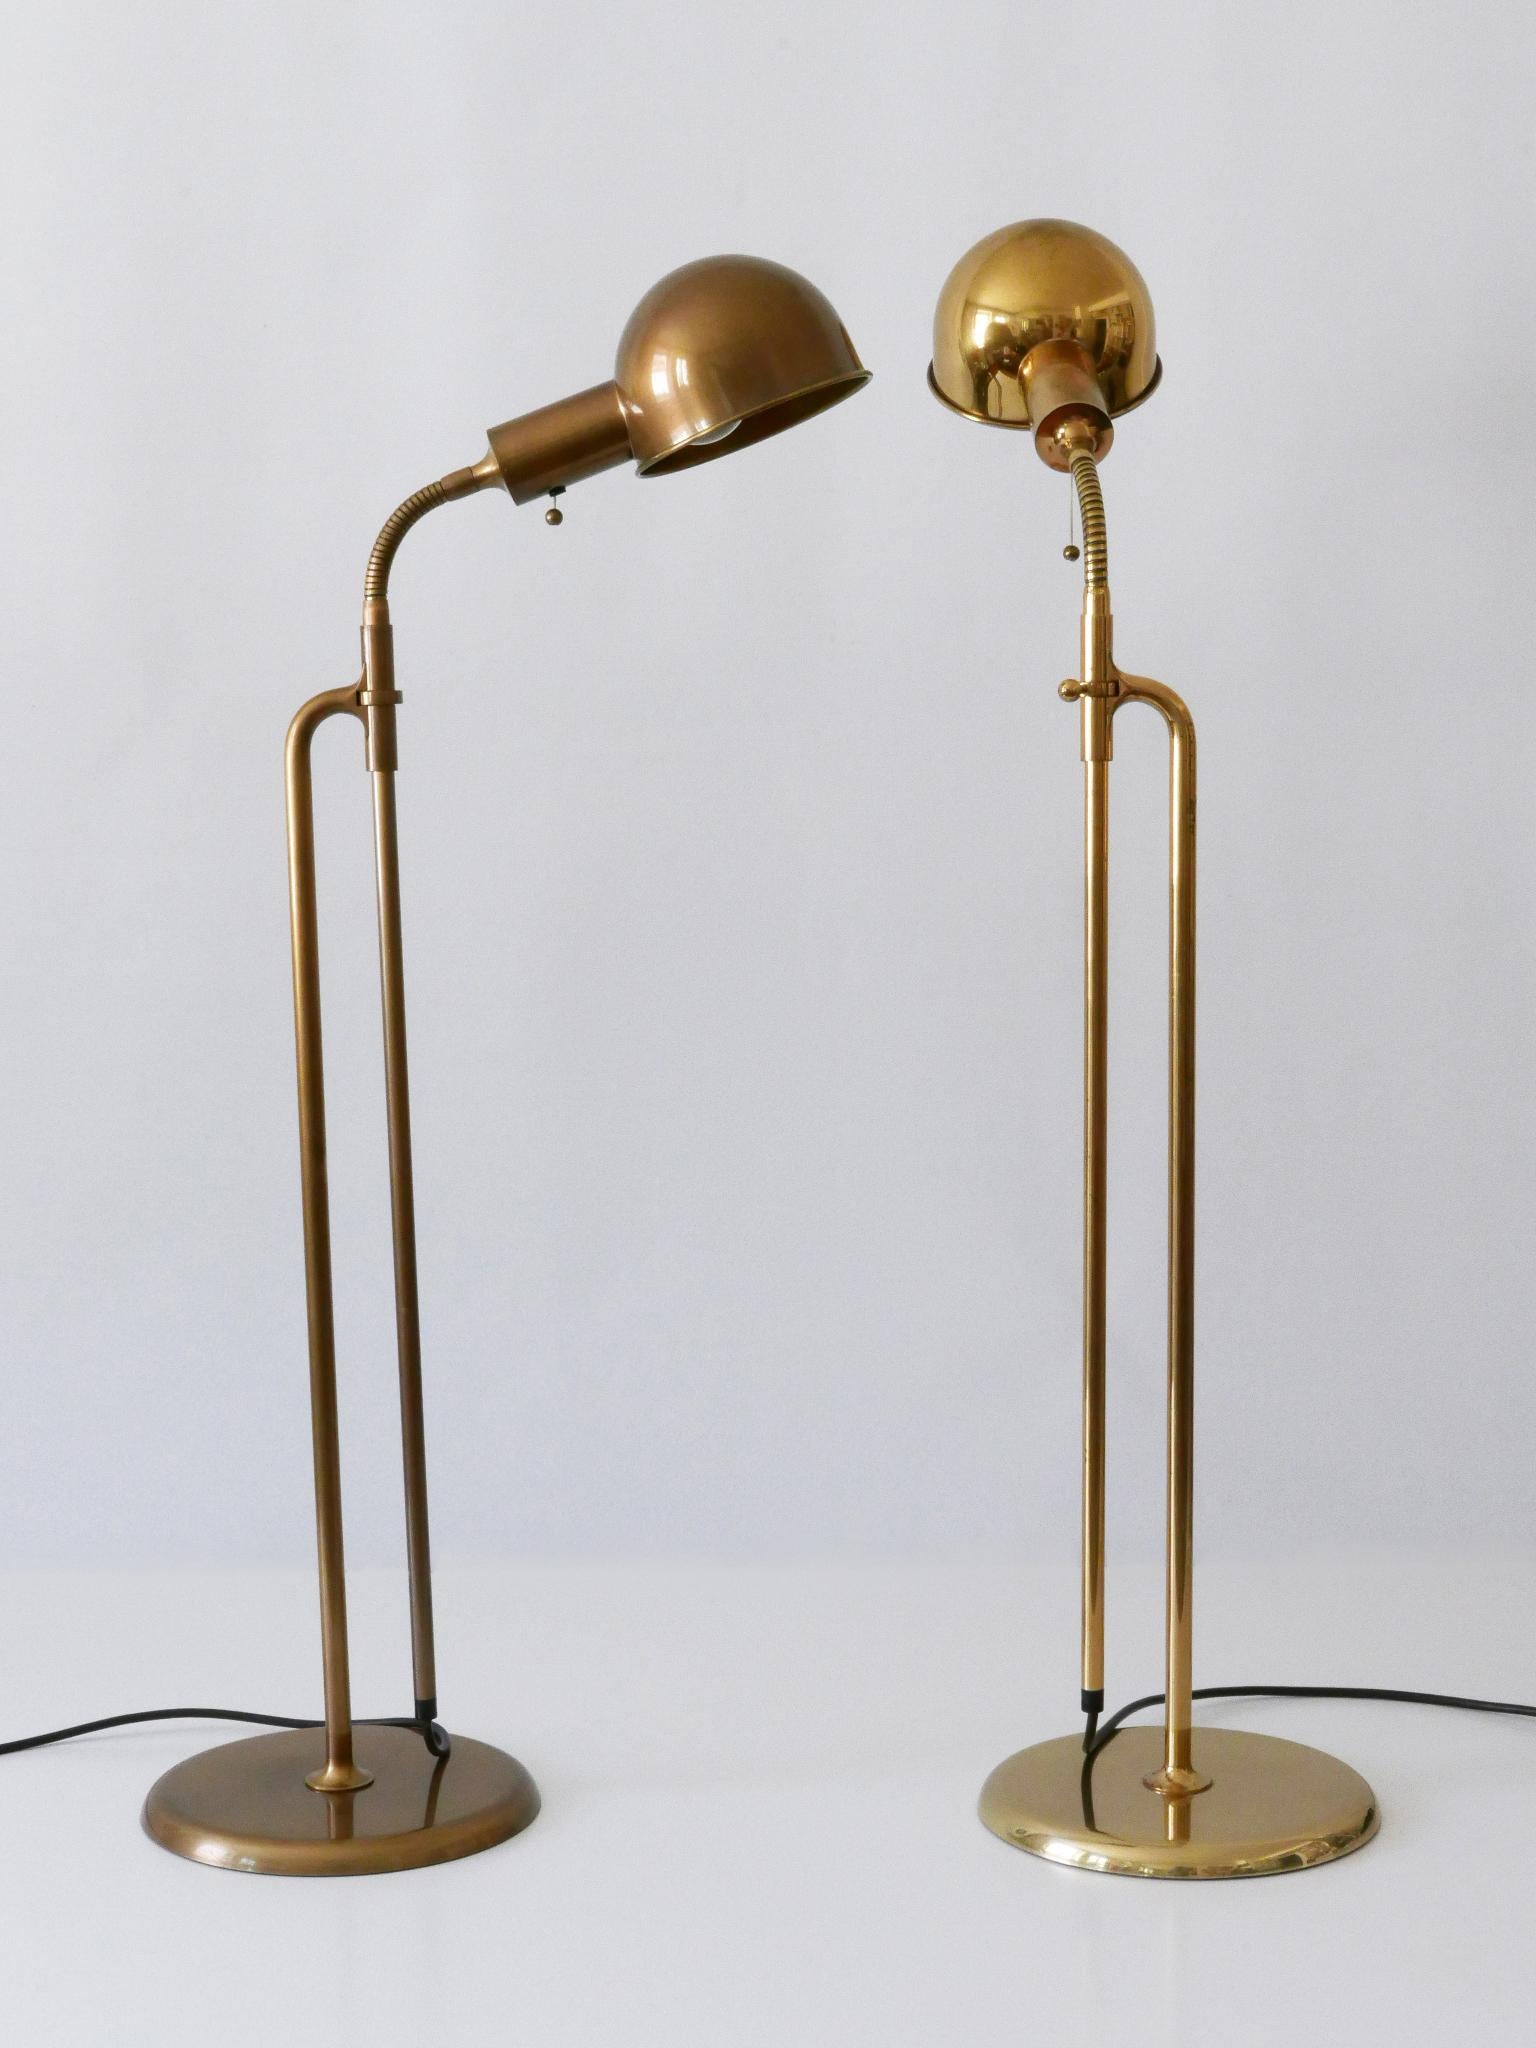 Bronzed Set of Two Mid-Century Modern Reading Floor Lamps 'Bola' by Florian Schulz 1970s For Sale